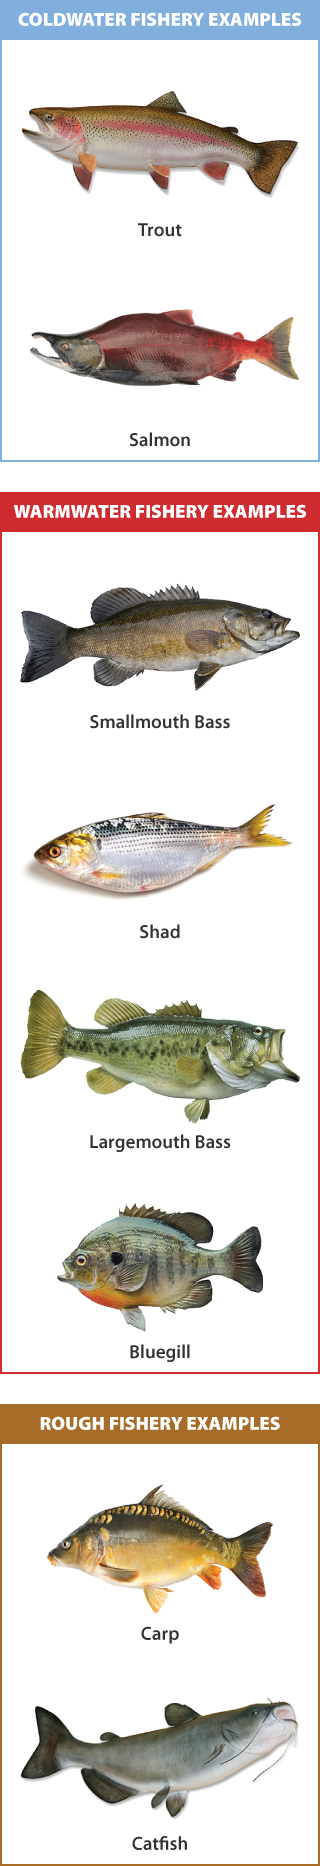 Infographic showing photos of different fish that live in coldwater, warmwater, and rough fisheries. Coldwater fish include trout and salmon; warmwater fish include smallmouth bass, shad, largemouth bass, and bluegilll; and rough fish include carp and catfish.